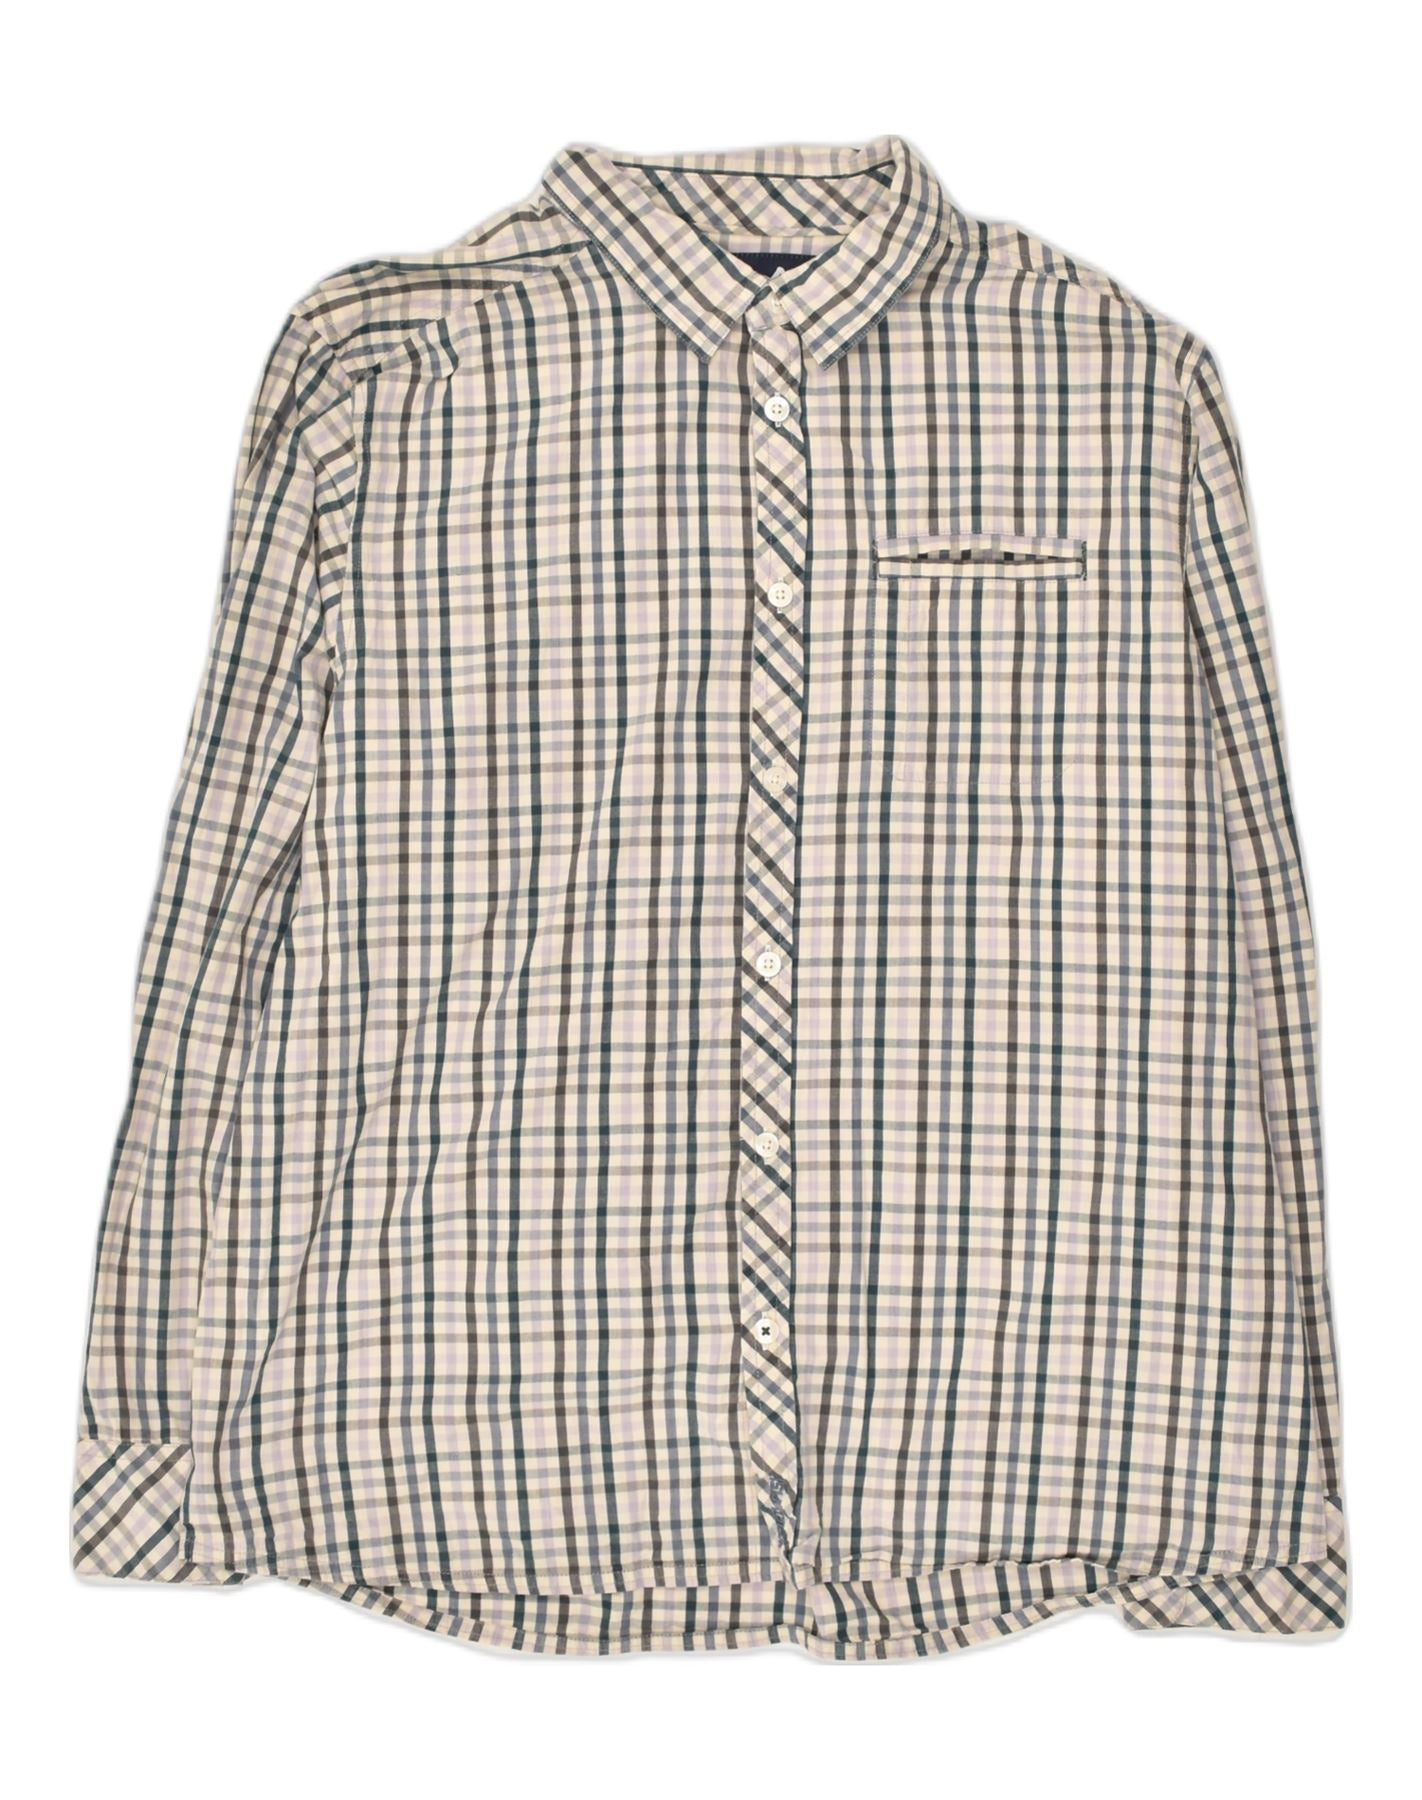 WEIRD FISH Mens Shirt XL Off White Check Cotton, Vintage & Second-Hand  Clothing Online